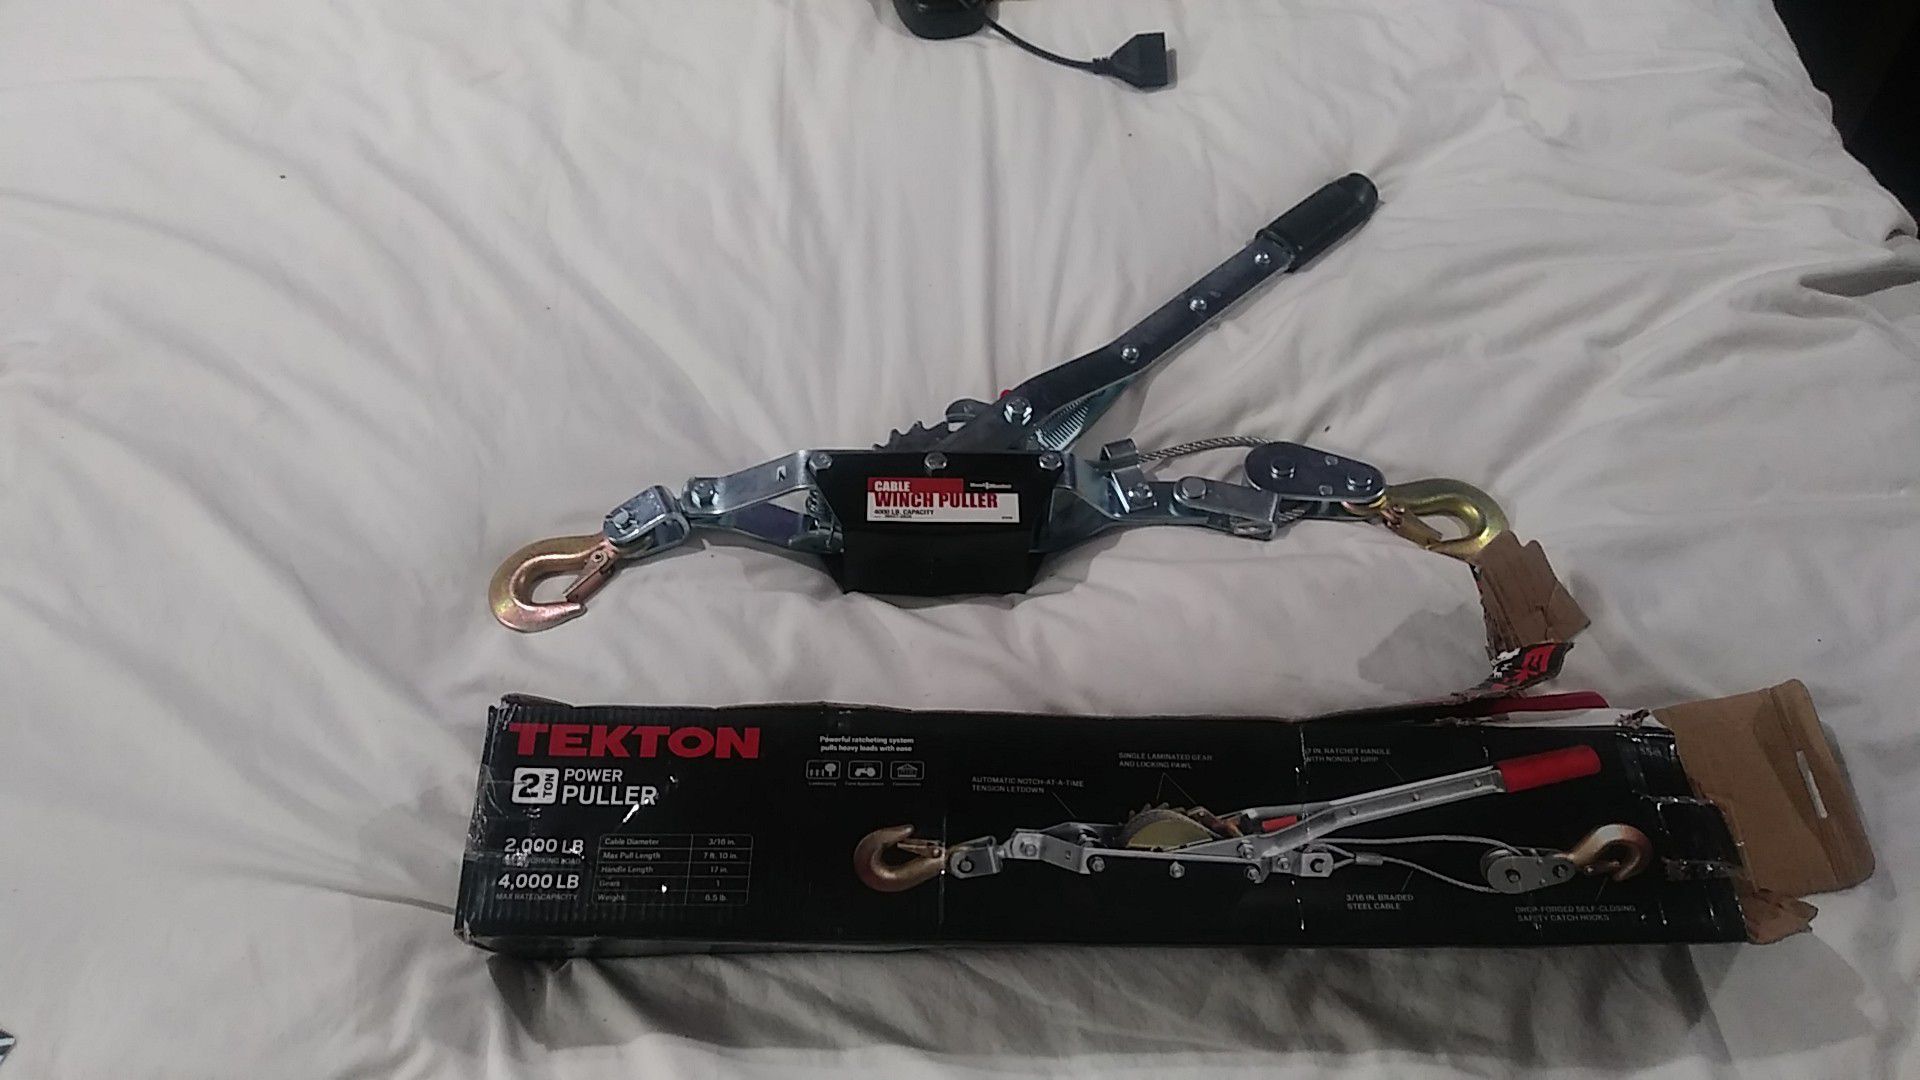 Cable winch puller and tekton 2ton puller